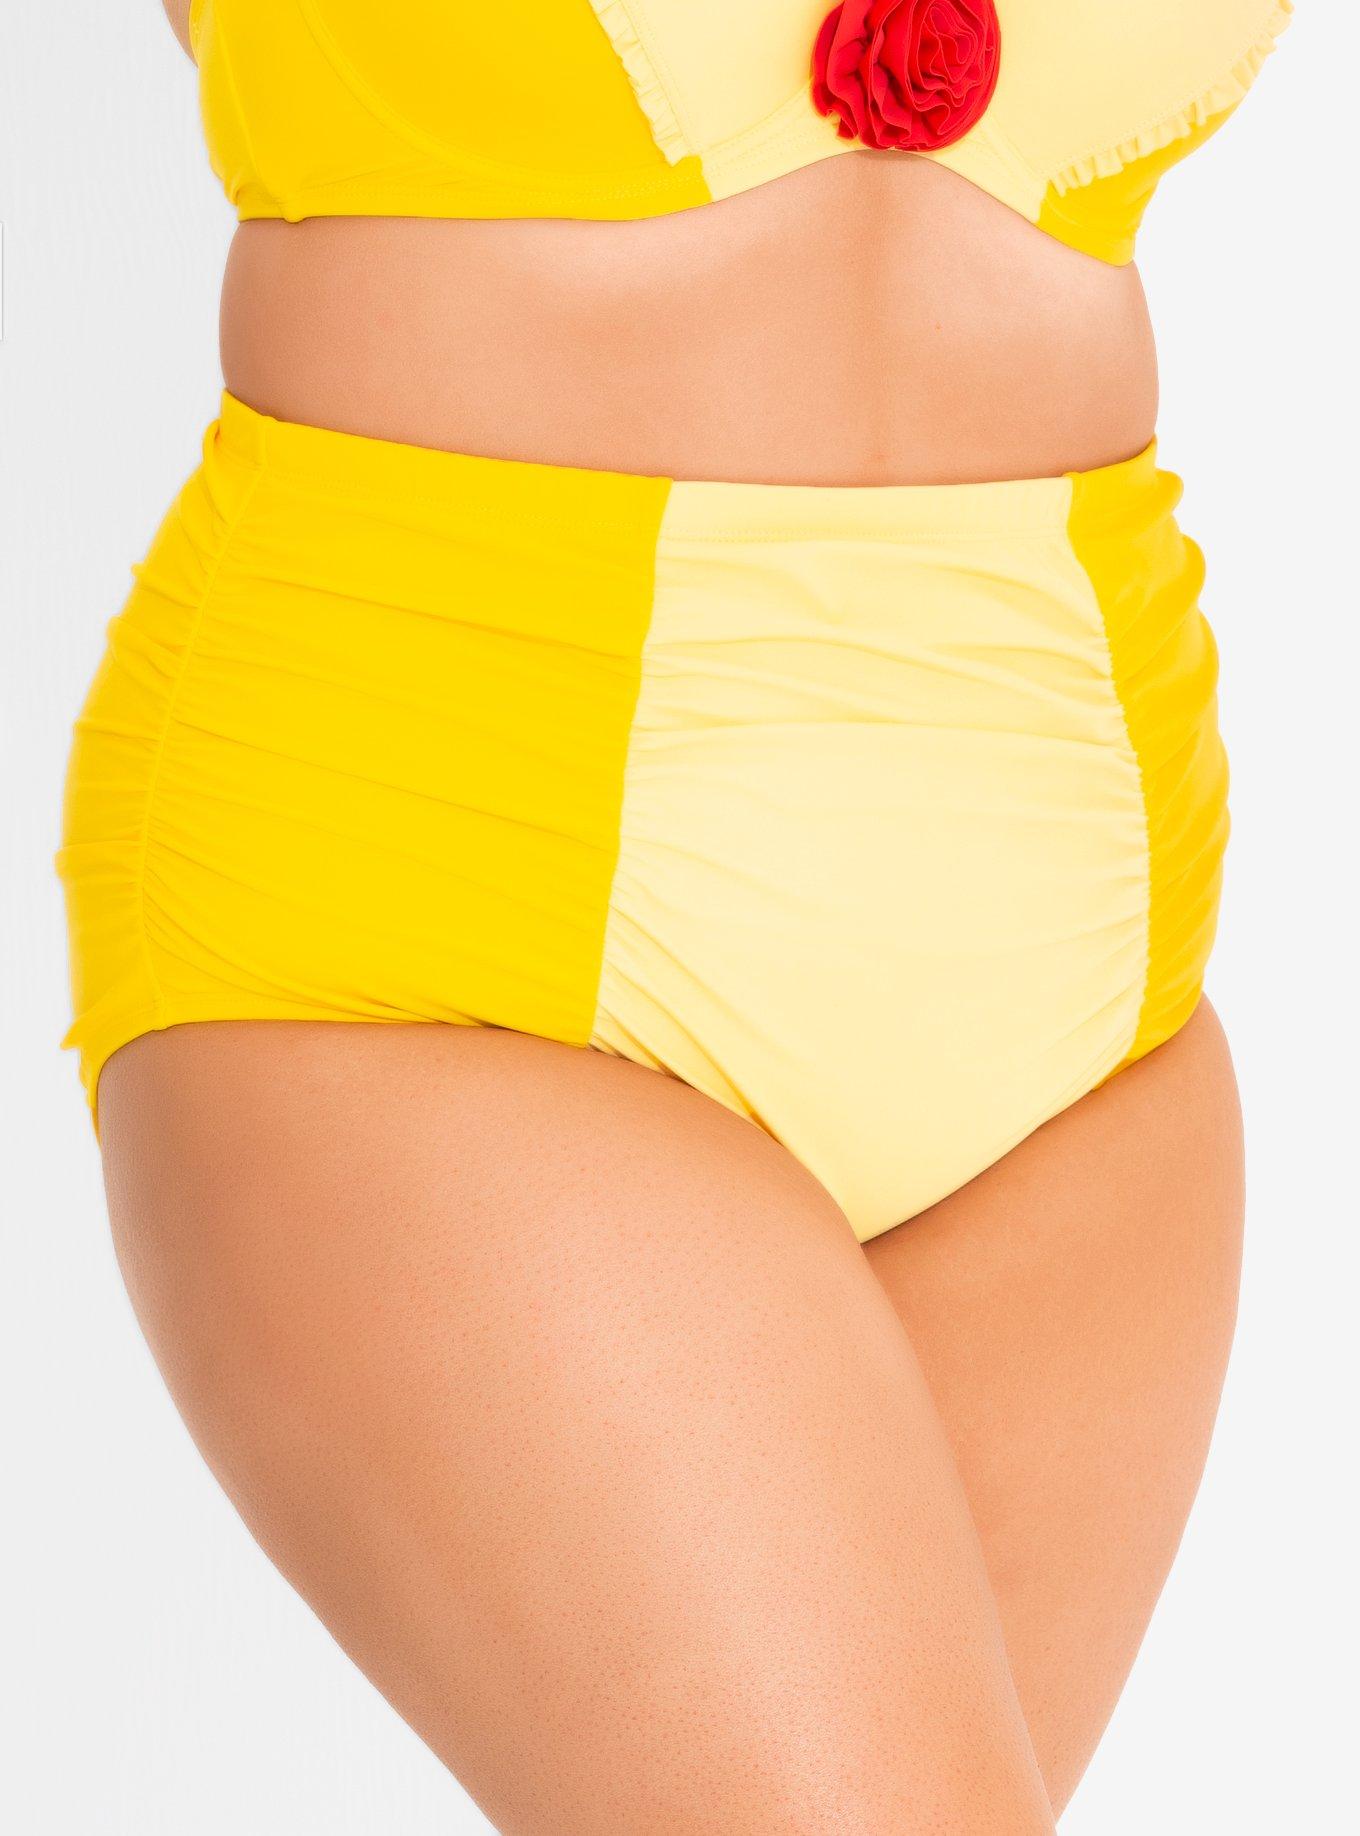 Disney Beauty And The Beast Belle Ruffle Swim Bottoms Plus Size, YELLOW, hi-res